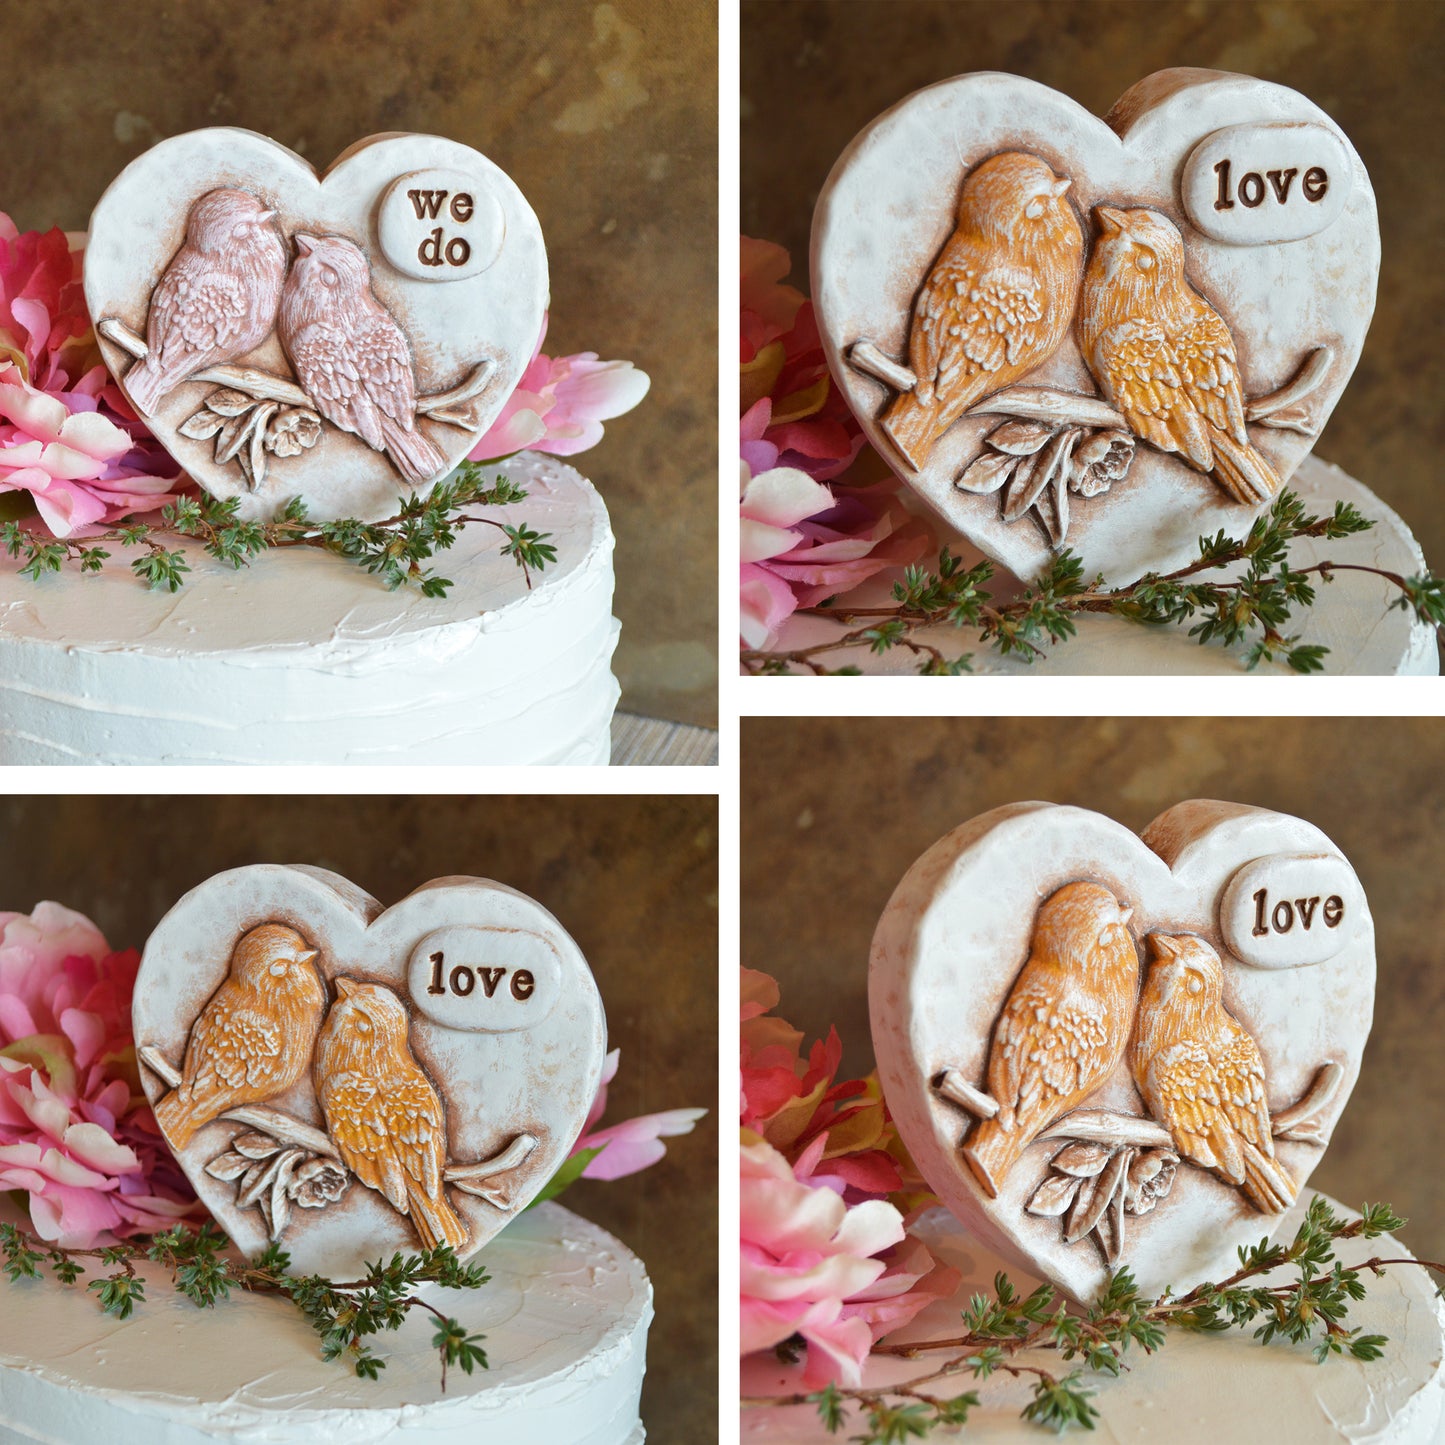 Lovebirds snuggling in a heart wedding cake topper / personalized with your initials and colors / great custom bespoke anniversary gift